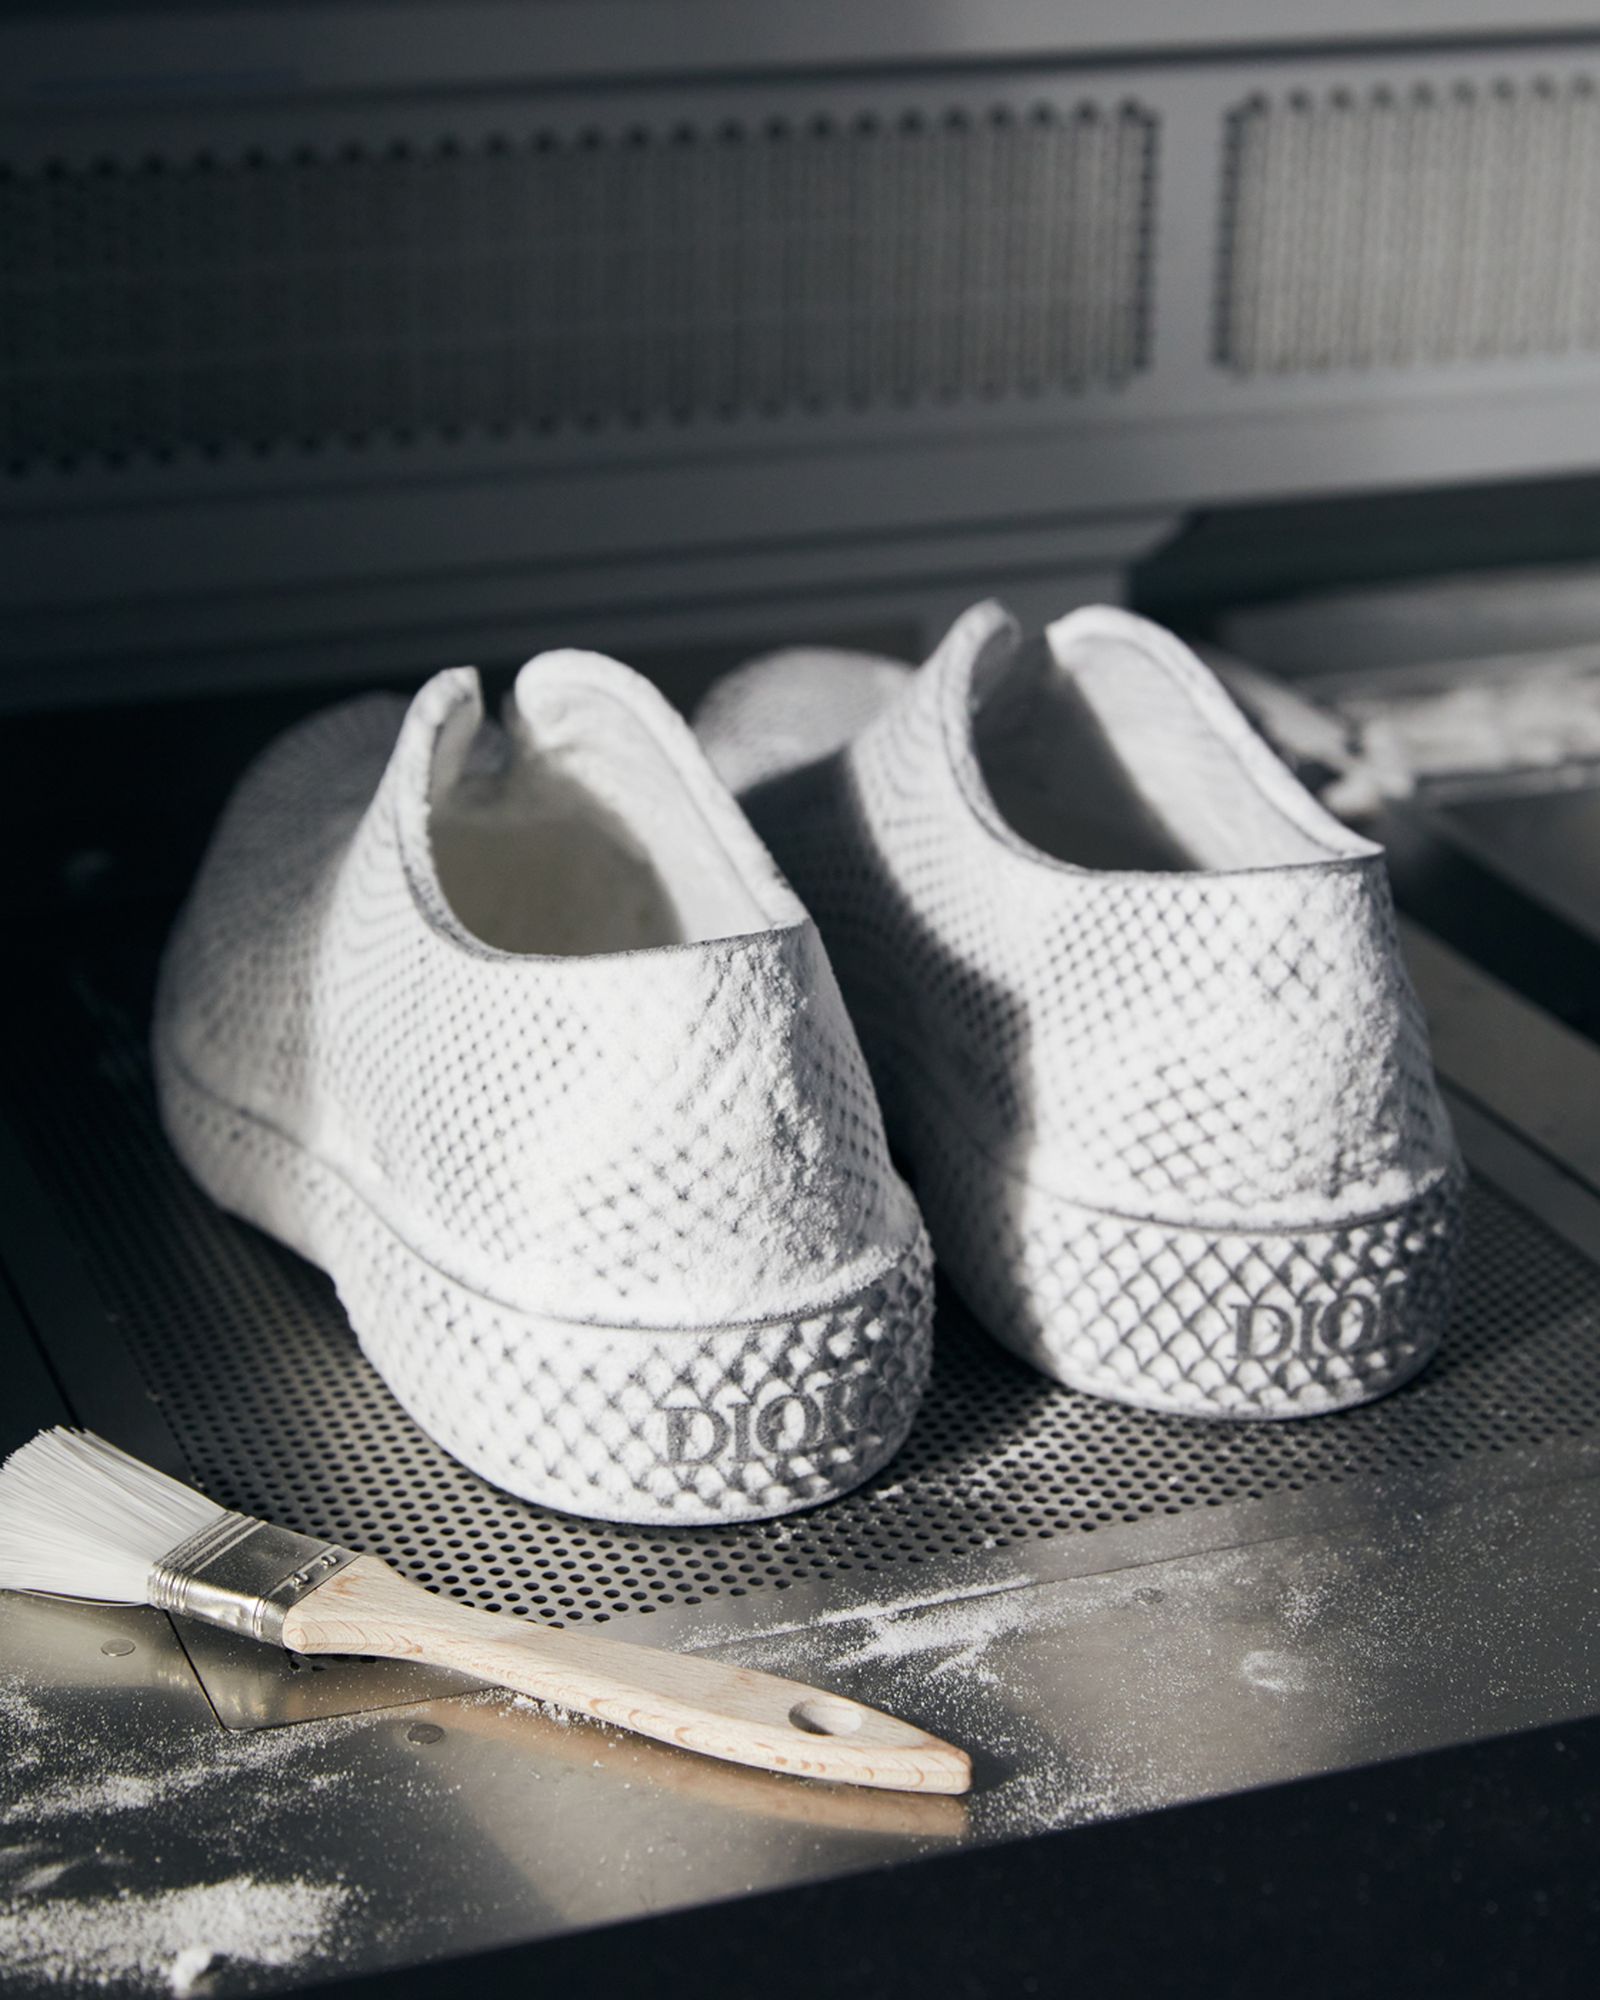 Here's How Dior Made its 3D-Printed Shoes